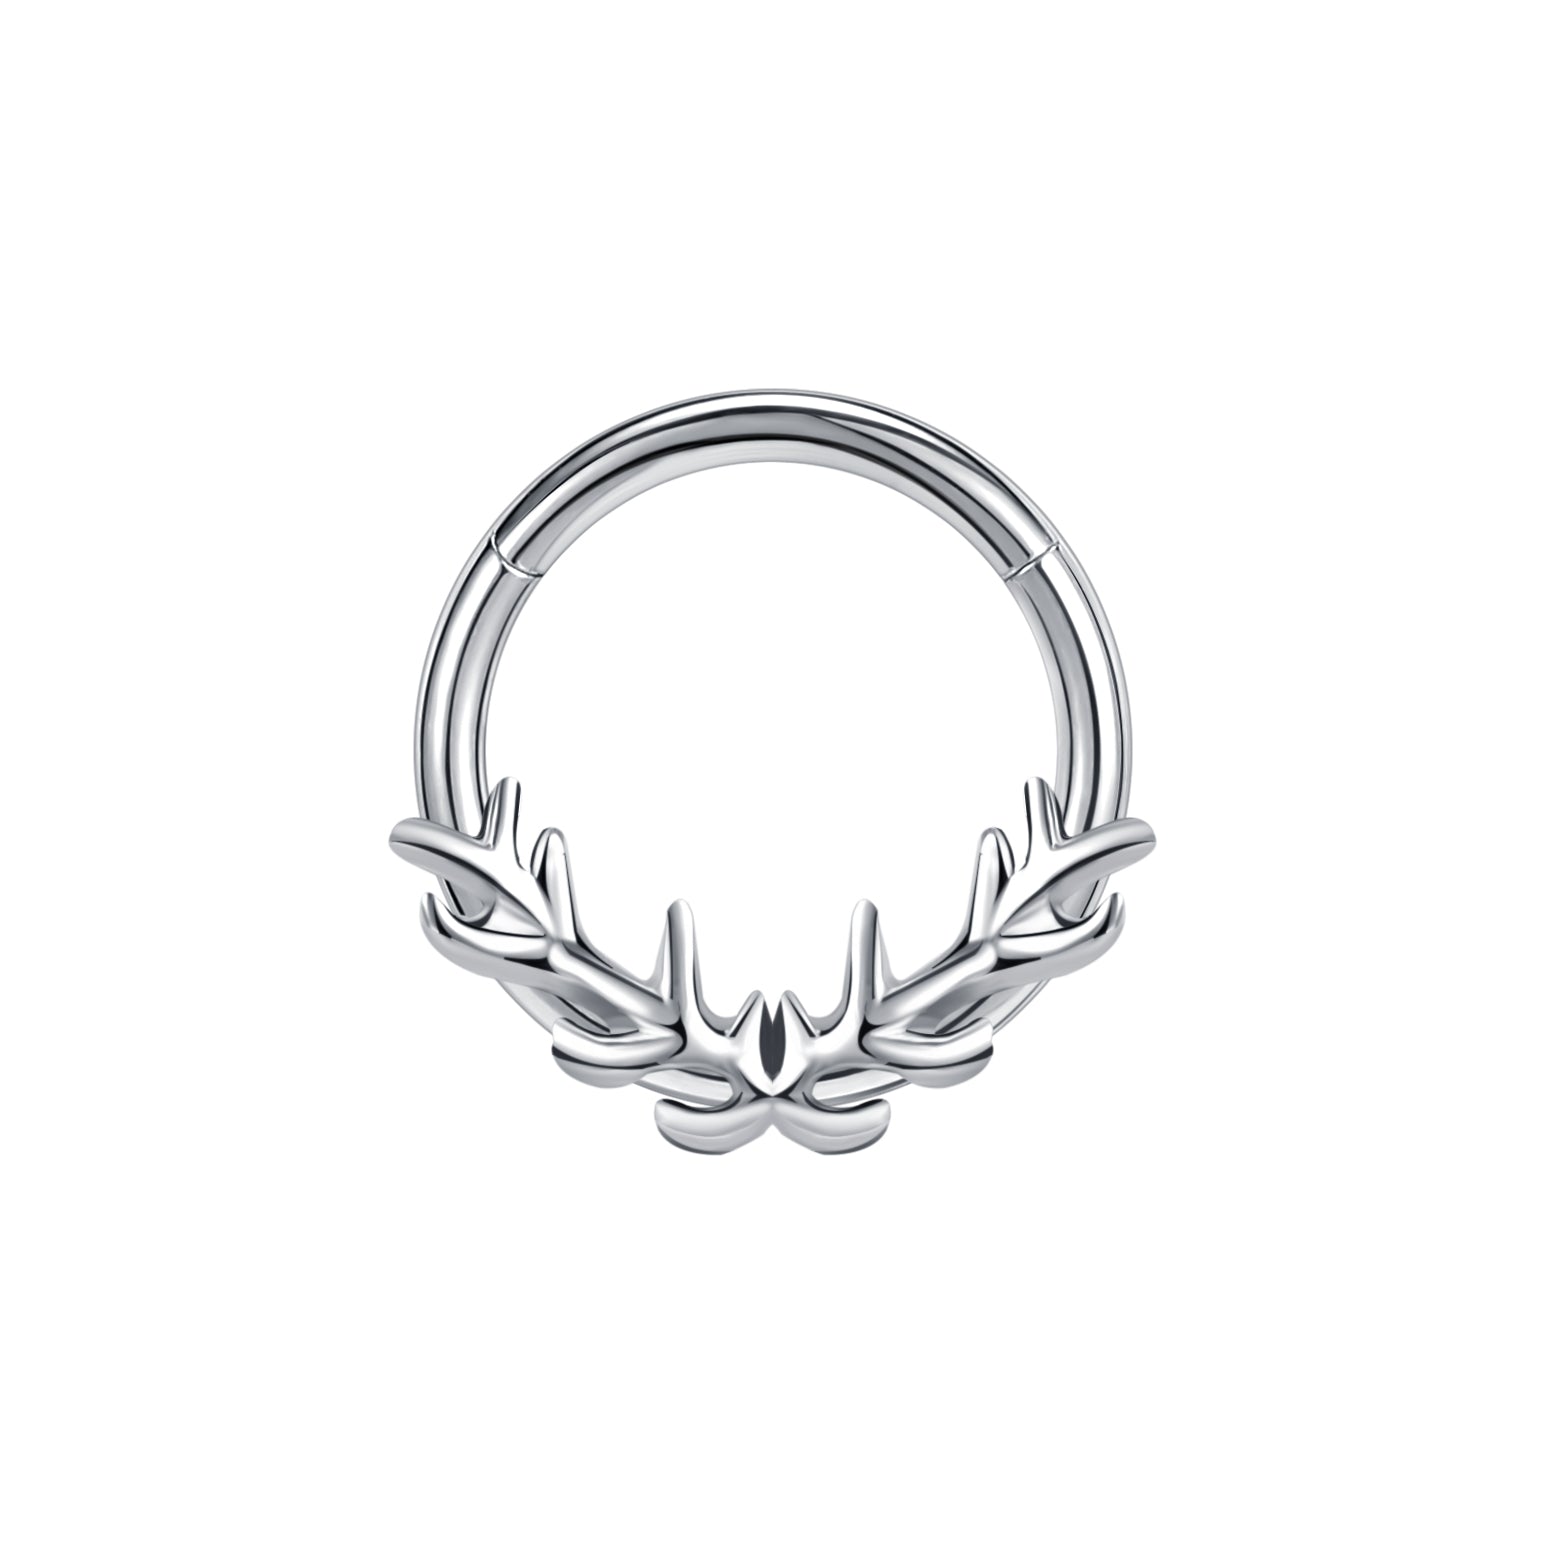 16g-antlers-nose-clicker-septum-ring-stainless-steel-cartilage-helix-piercing